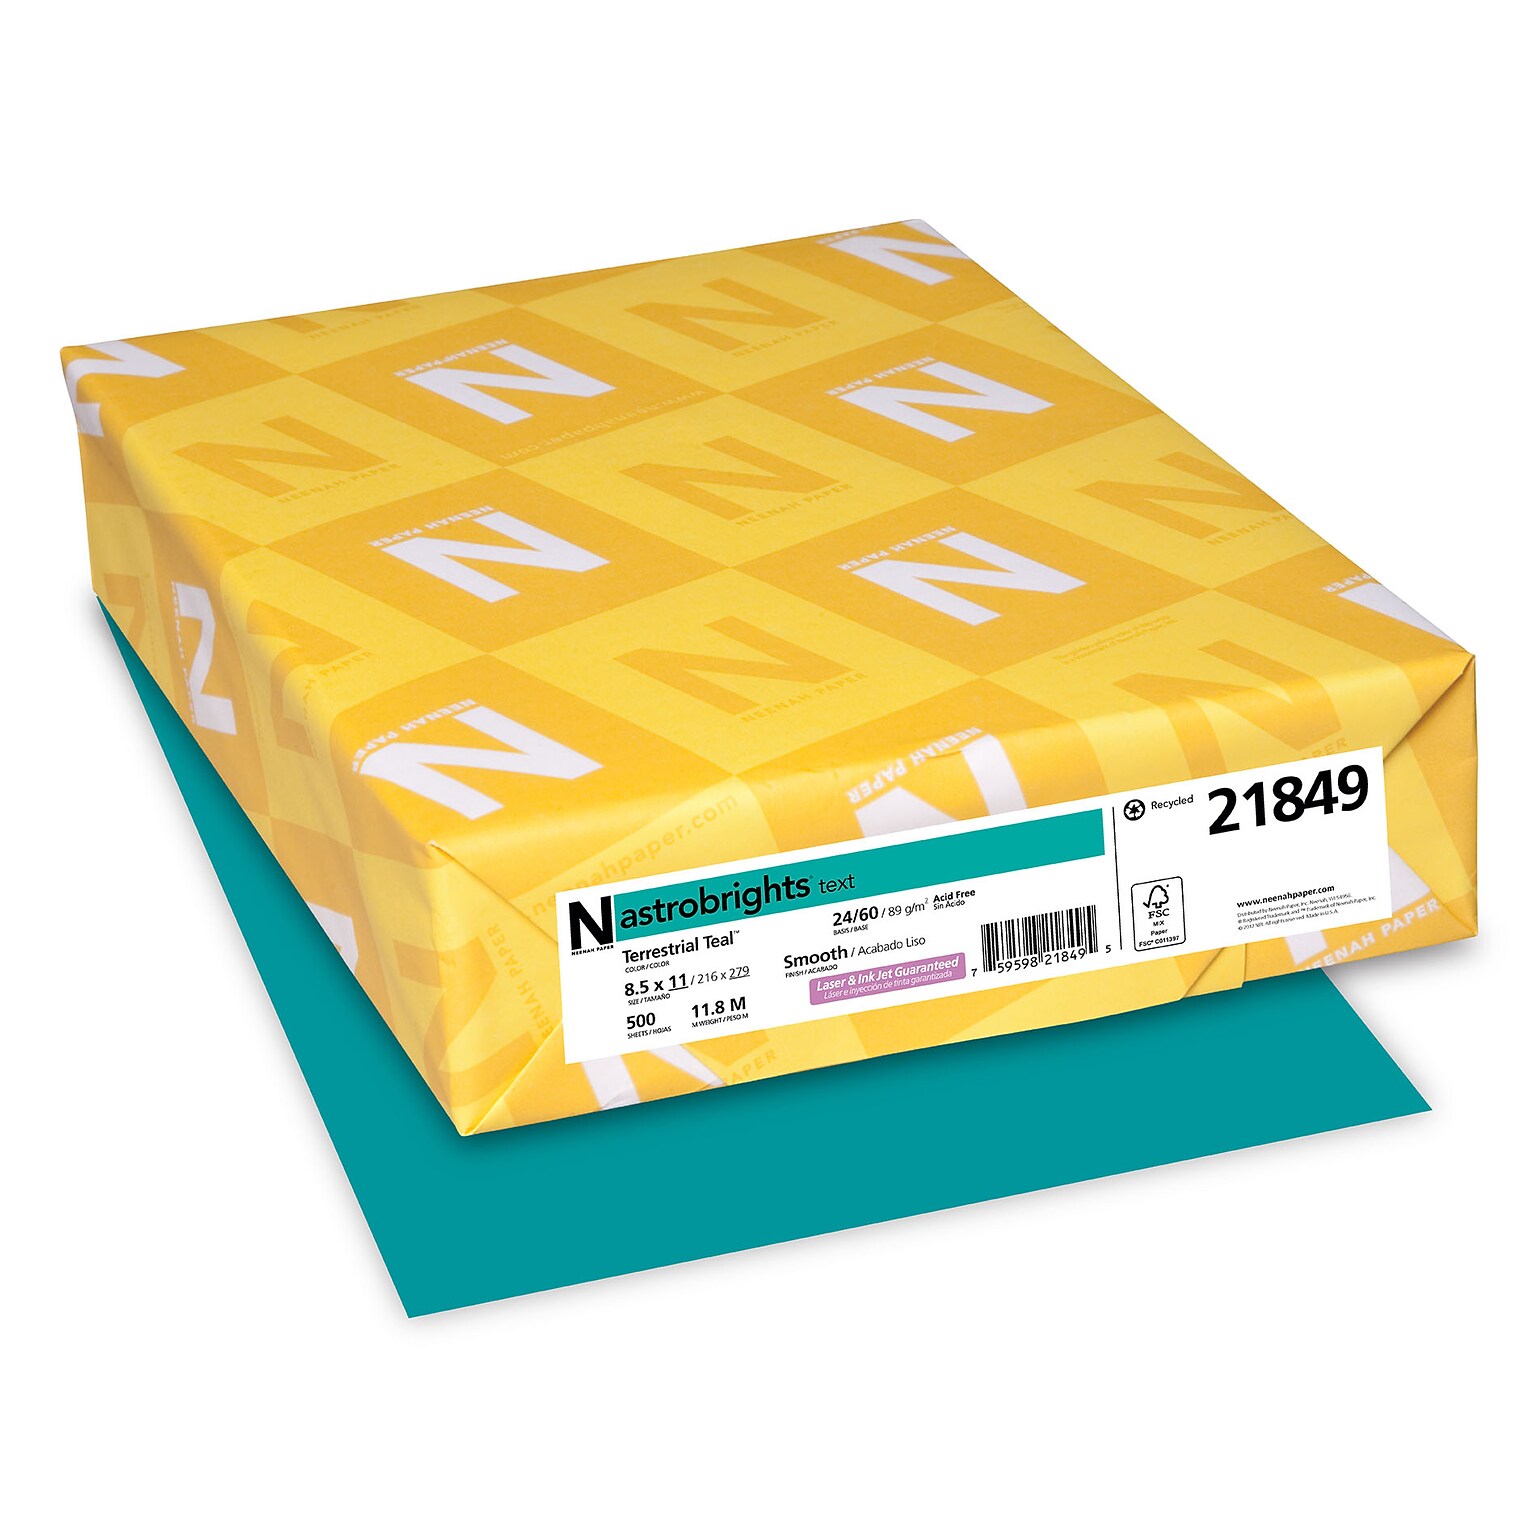 Astrobrights Colored Paper, 24 lbs., 8.5 x 11, Terrestrial Teal, 500 Sheets/Ream (21849/22479)